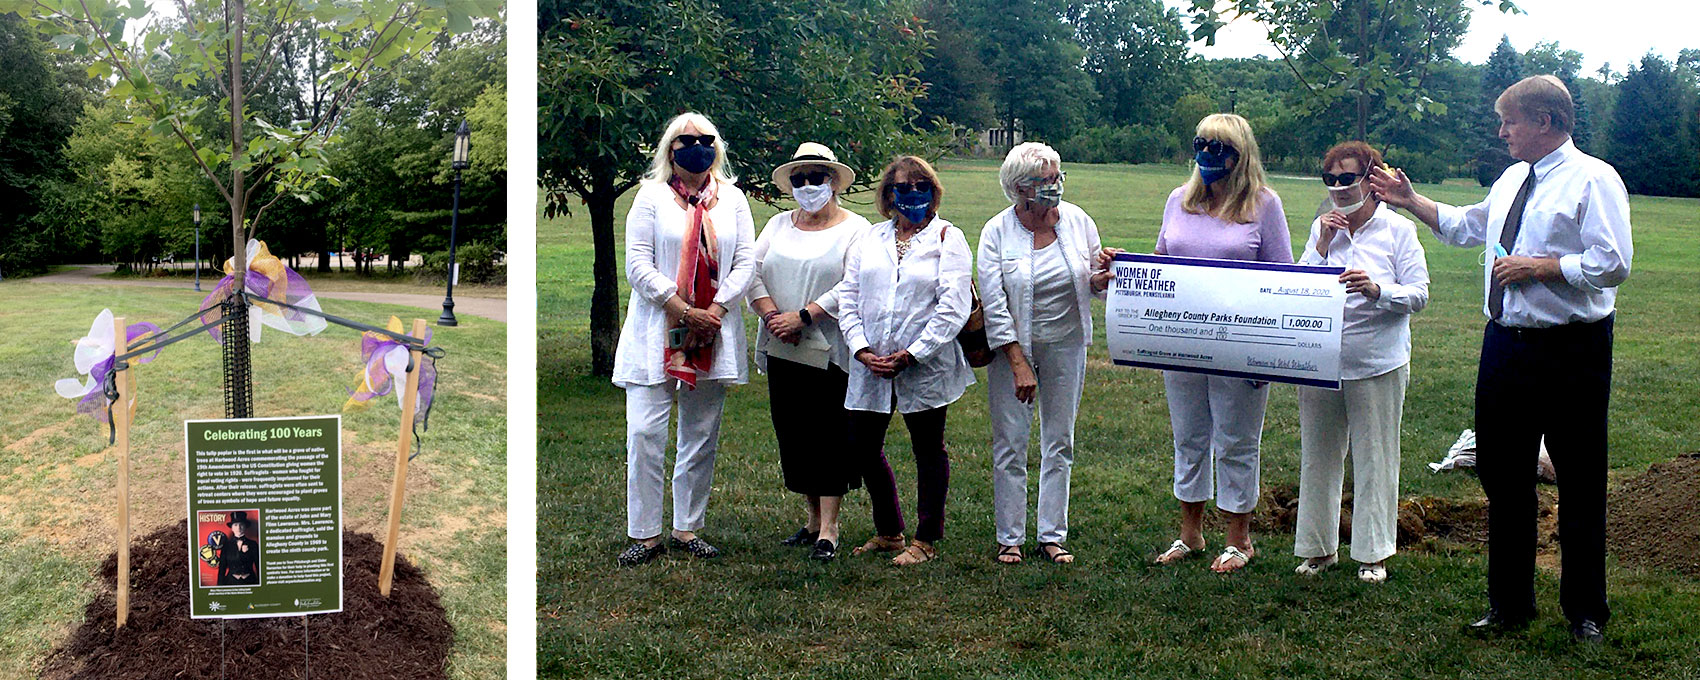 Allegheny County Parks Foundation Executive Director Caren Glotfelty (center) receives the first donation to the Suffragist Grove from Women of Wet Weather. County Executive Rich Fitzgerald is on hand to announce the project.